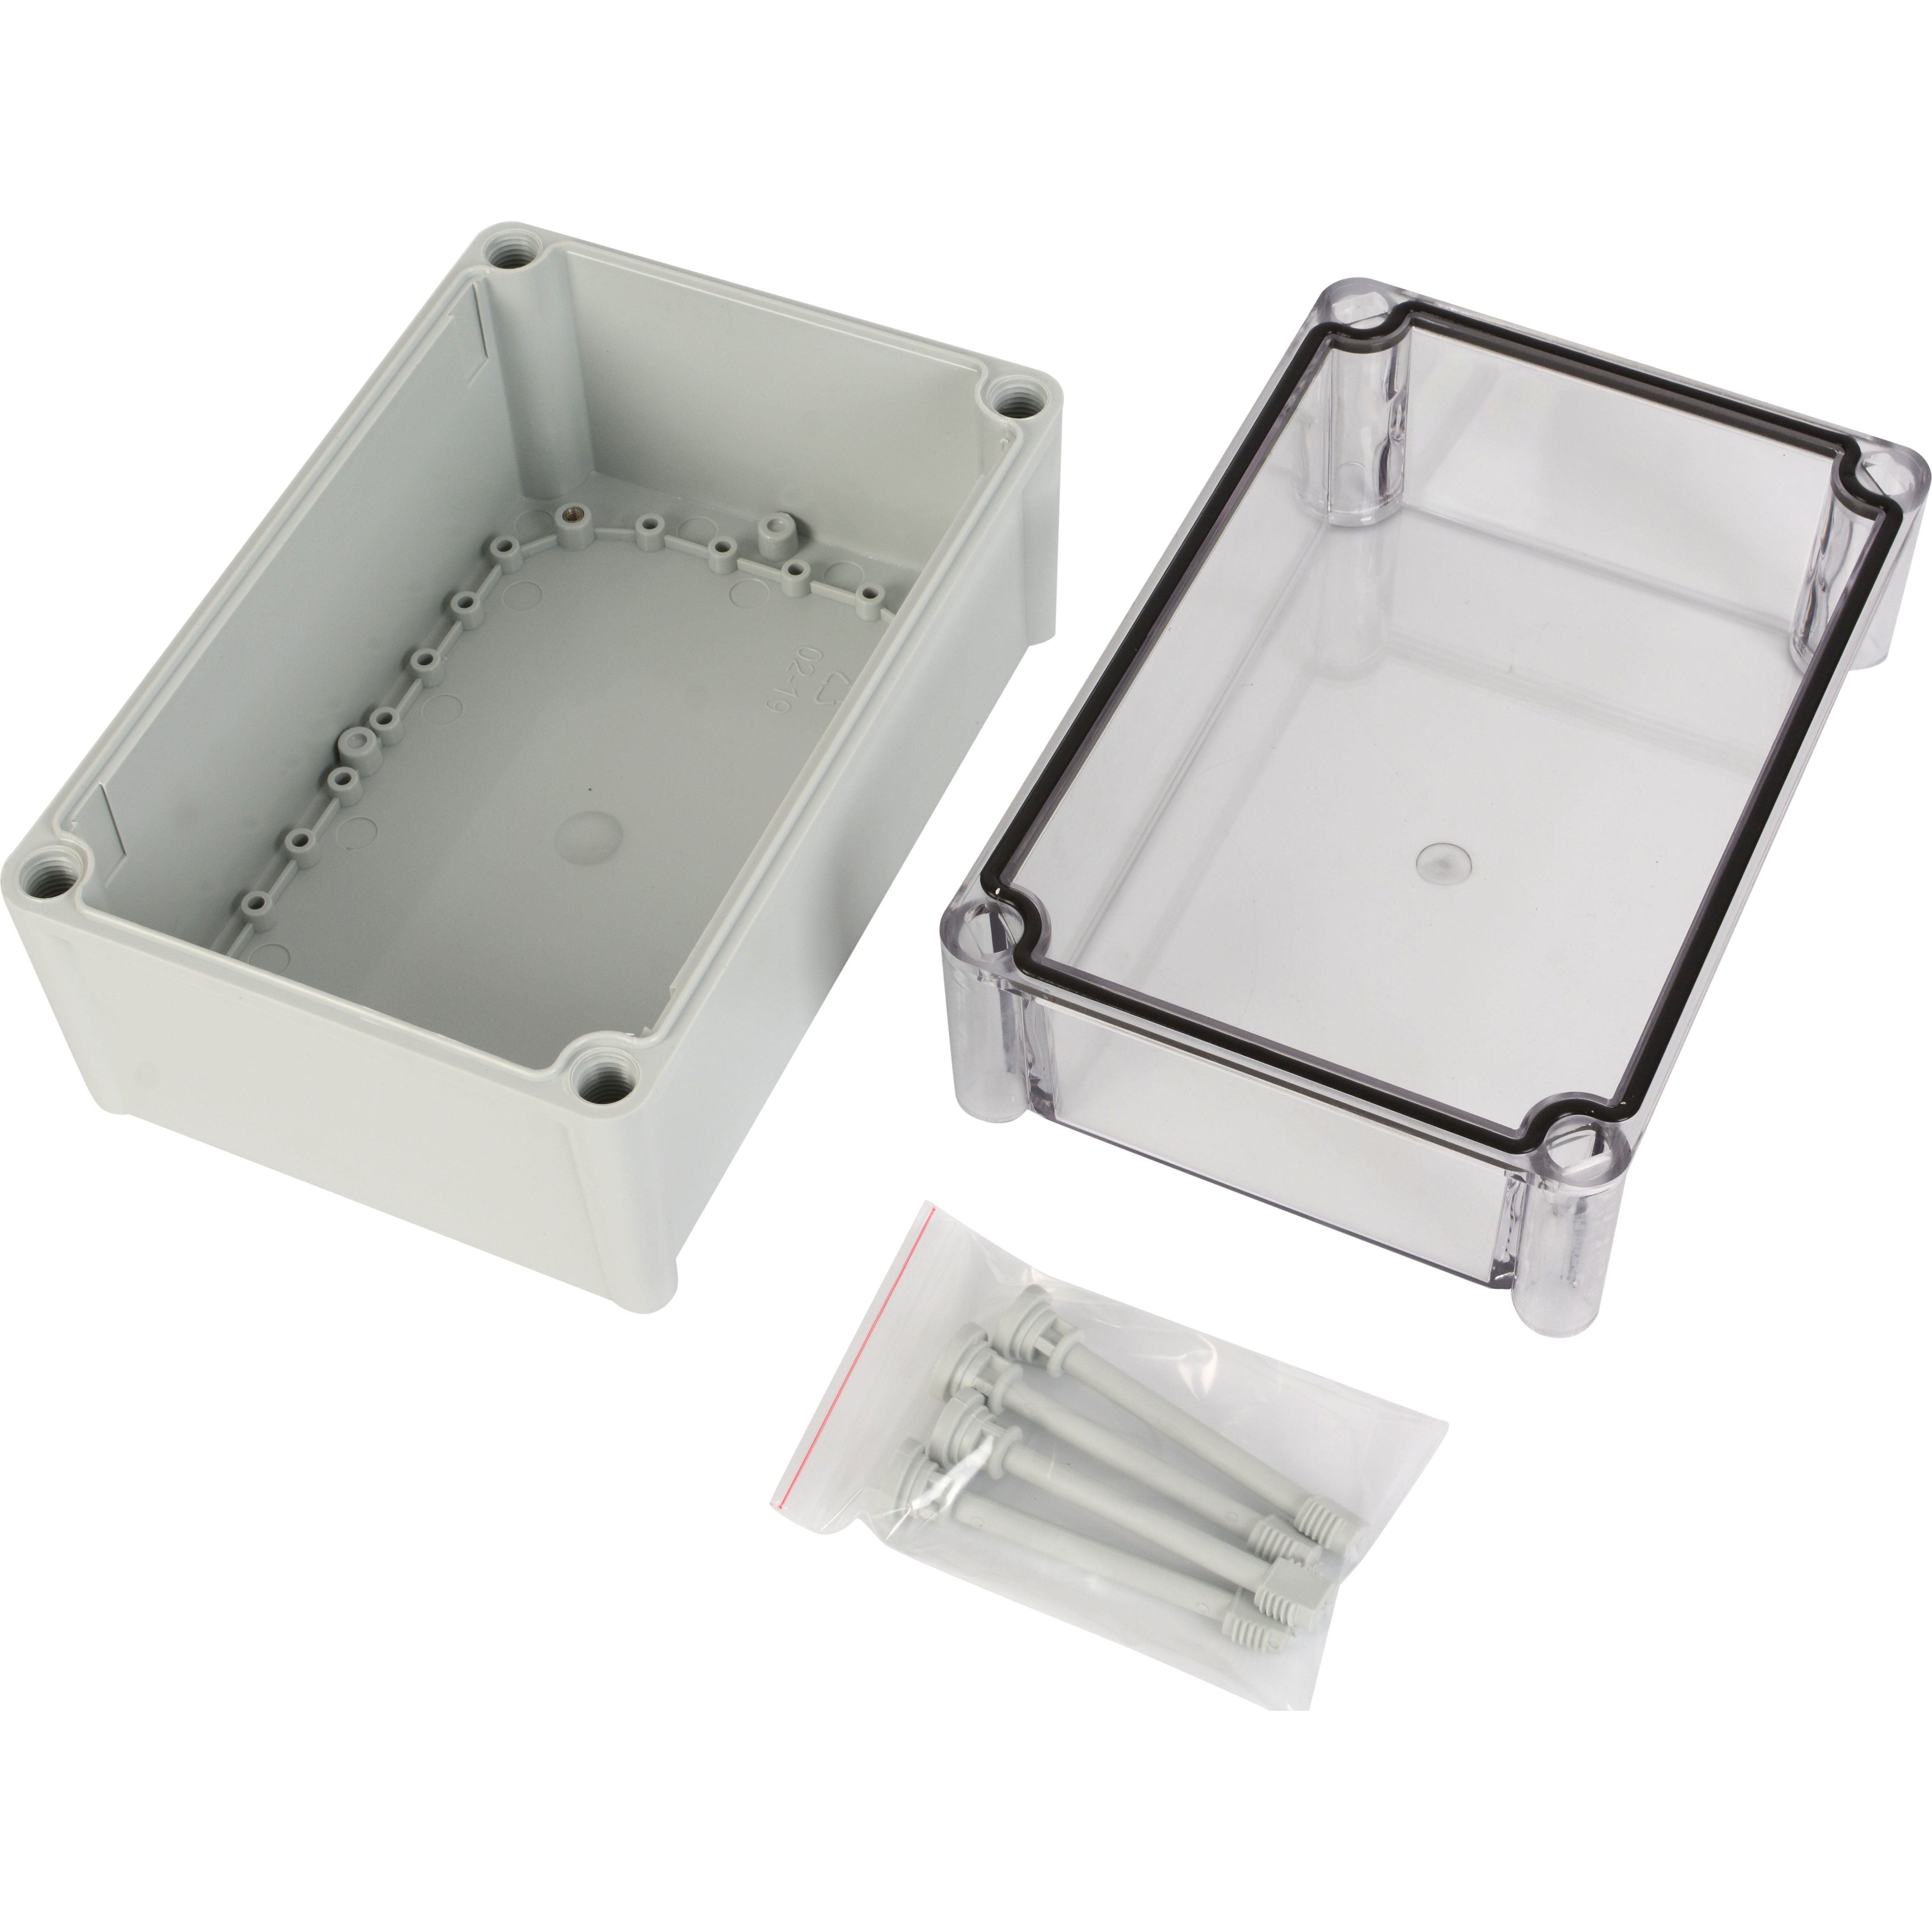  ABS IP66 Clear Lid Junction Box 280 x 190 x 180mm